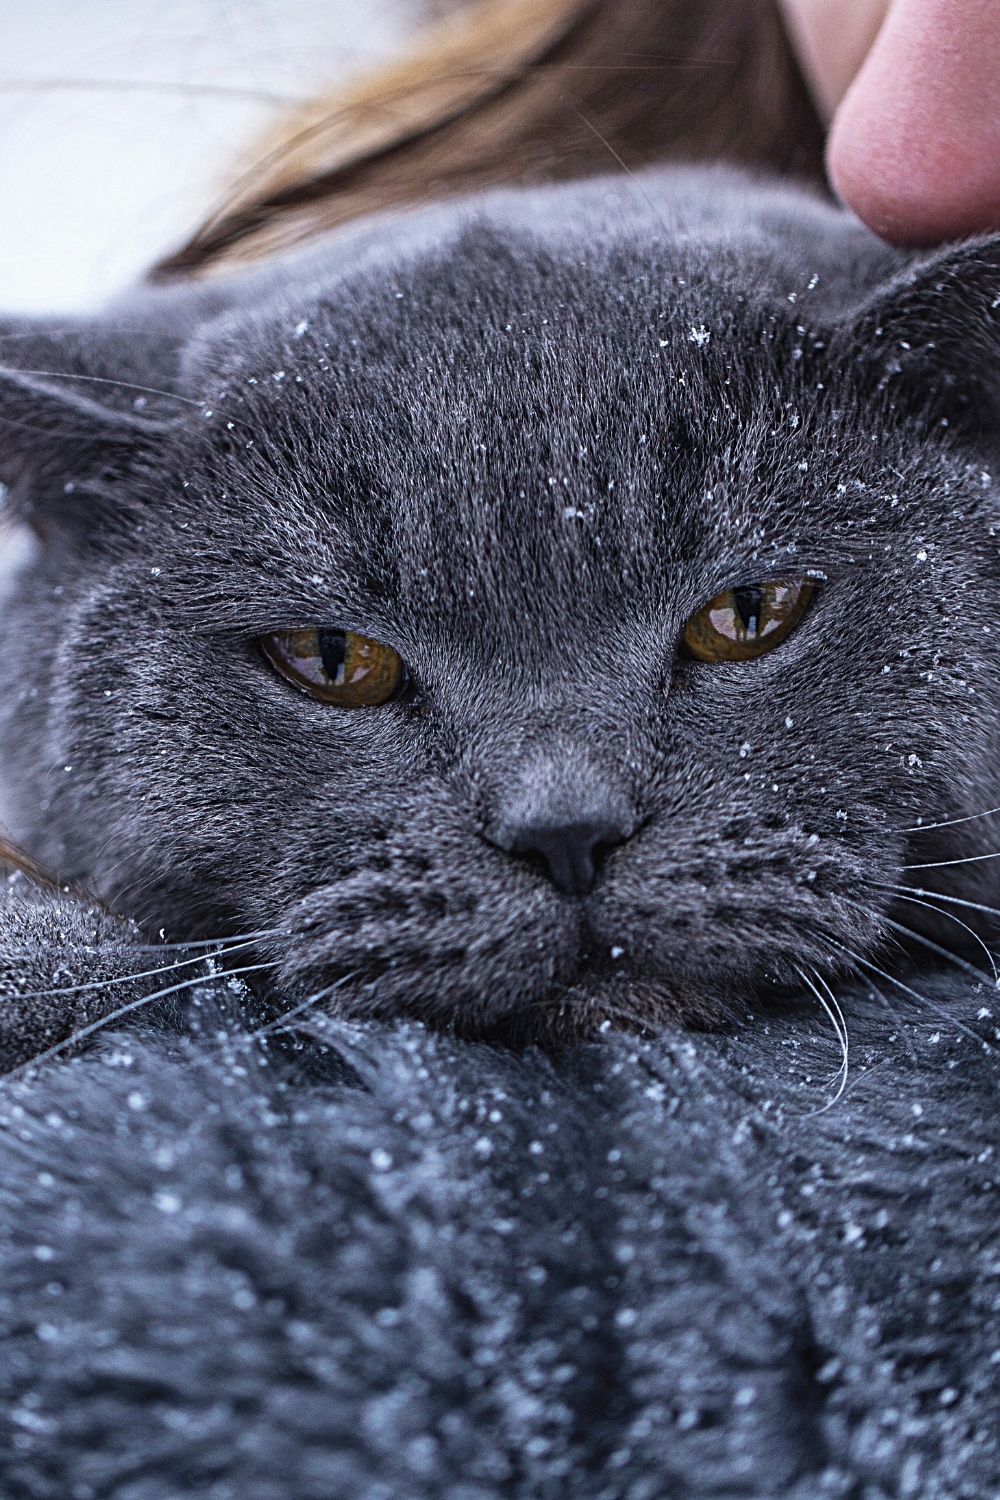 Cats with dark-colored coats handle cold temperatures better than their light-coated counterparts